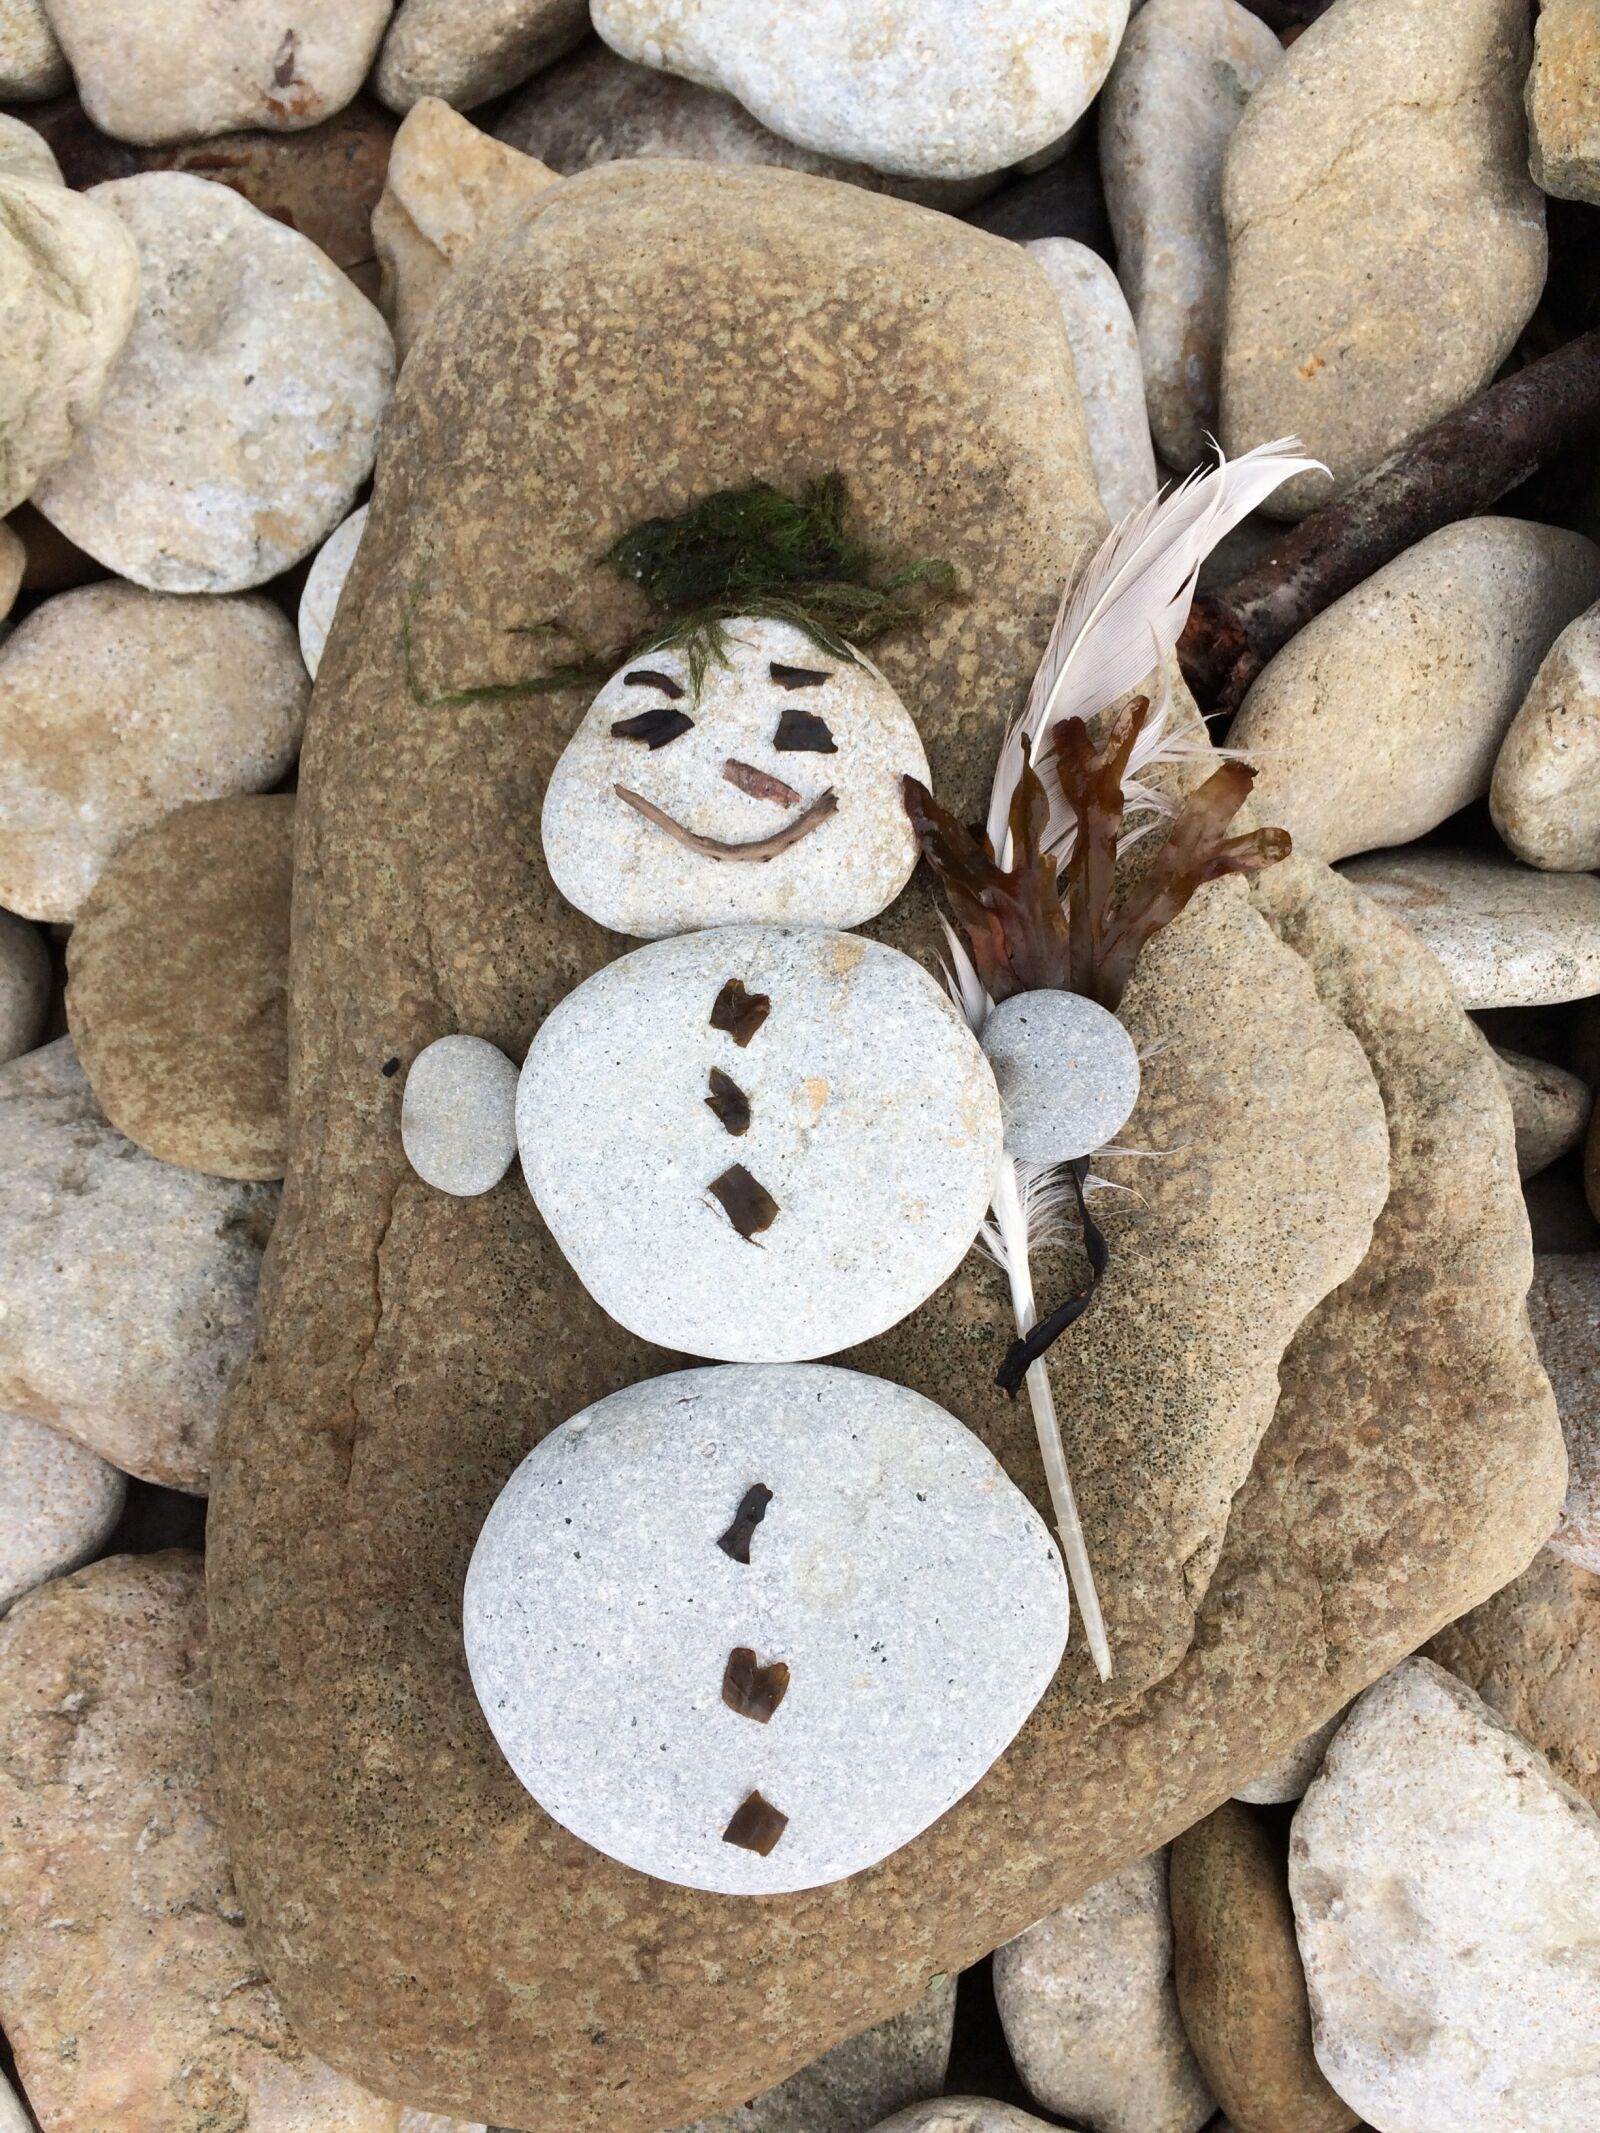 Apple iPhone 5s + iPhone 5s back camera 4.15mm f/2.2 sample photo. Stone, snowman, smiles photography